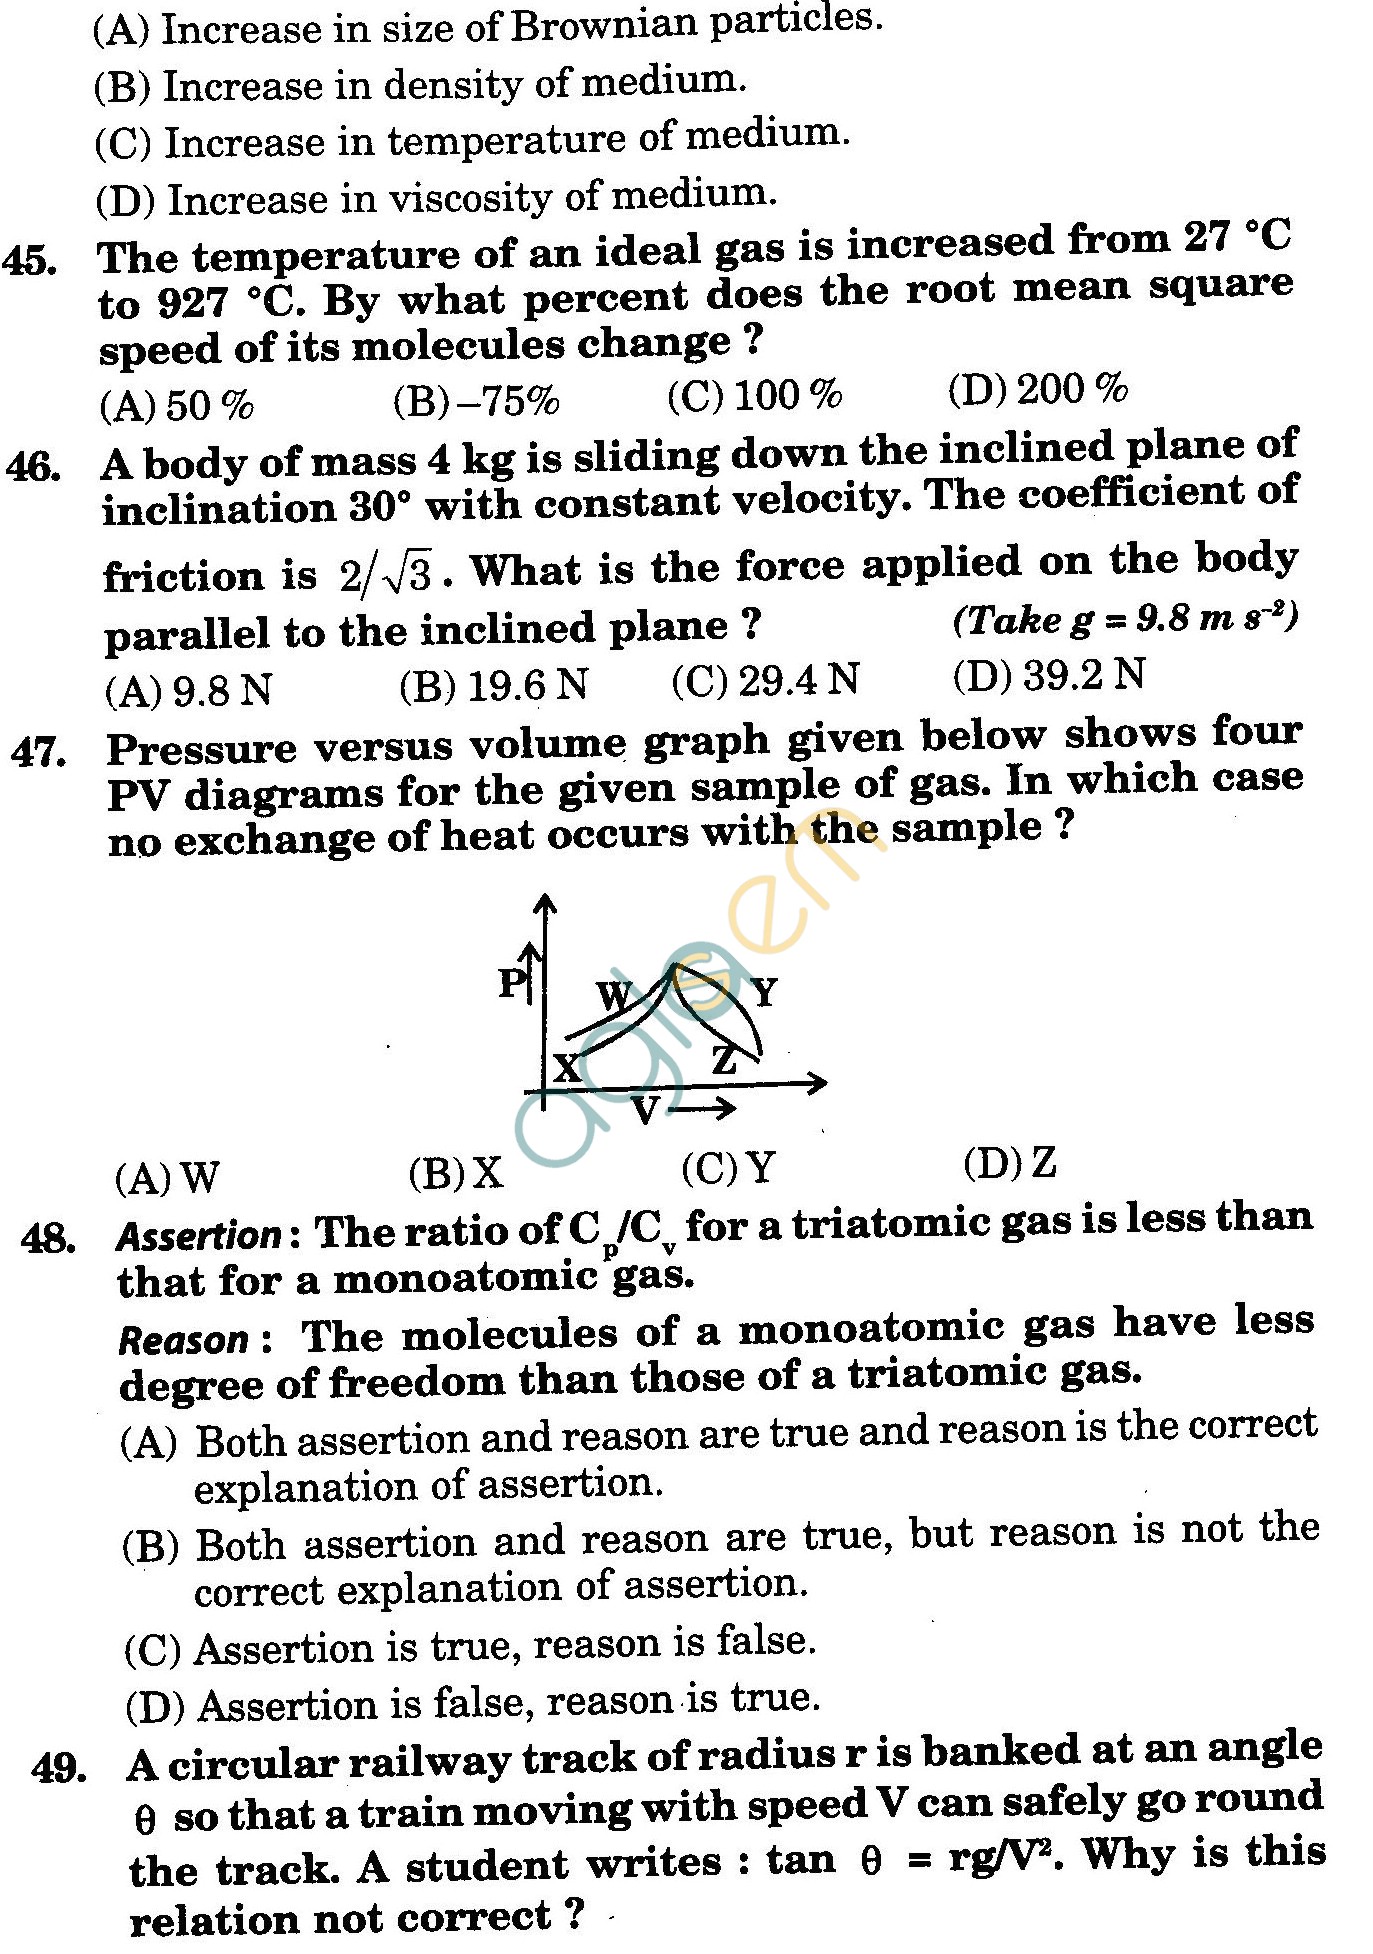 NSTSE 2010 Class XI PCB Question Paper with Answers - Physics